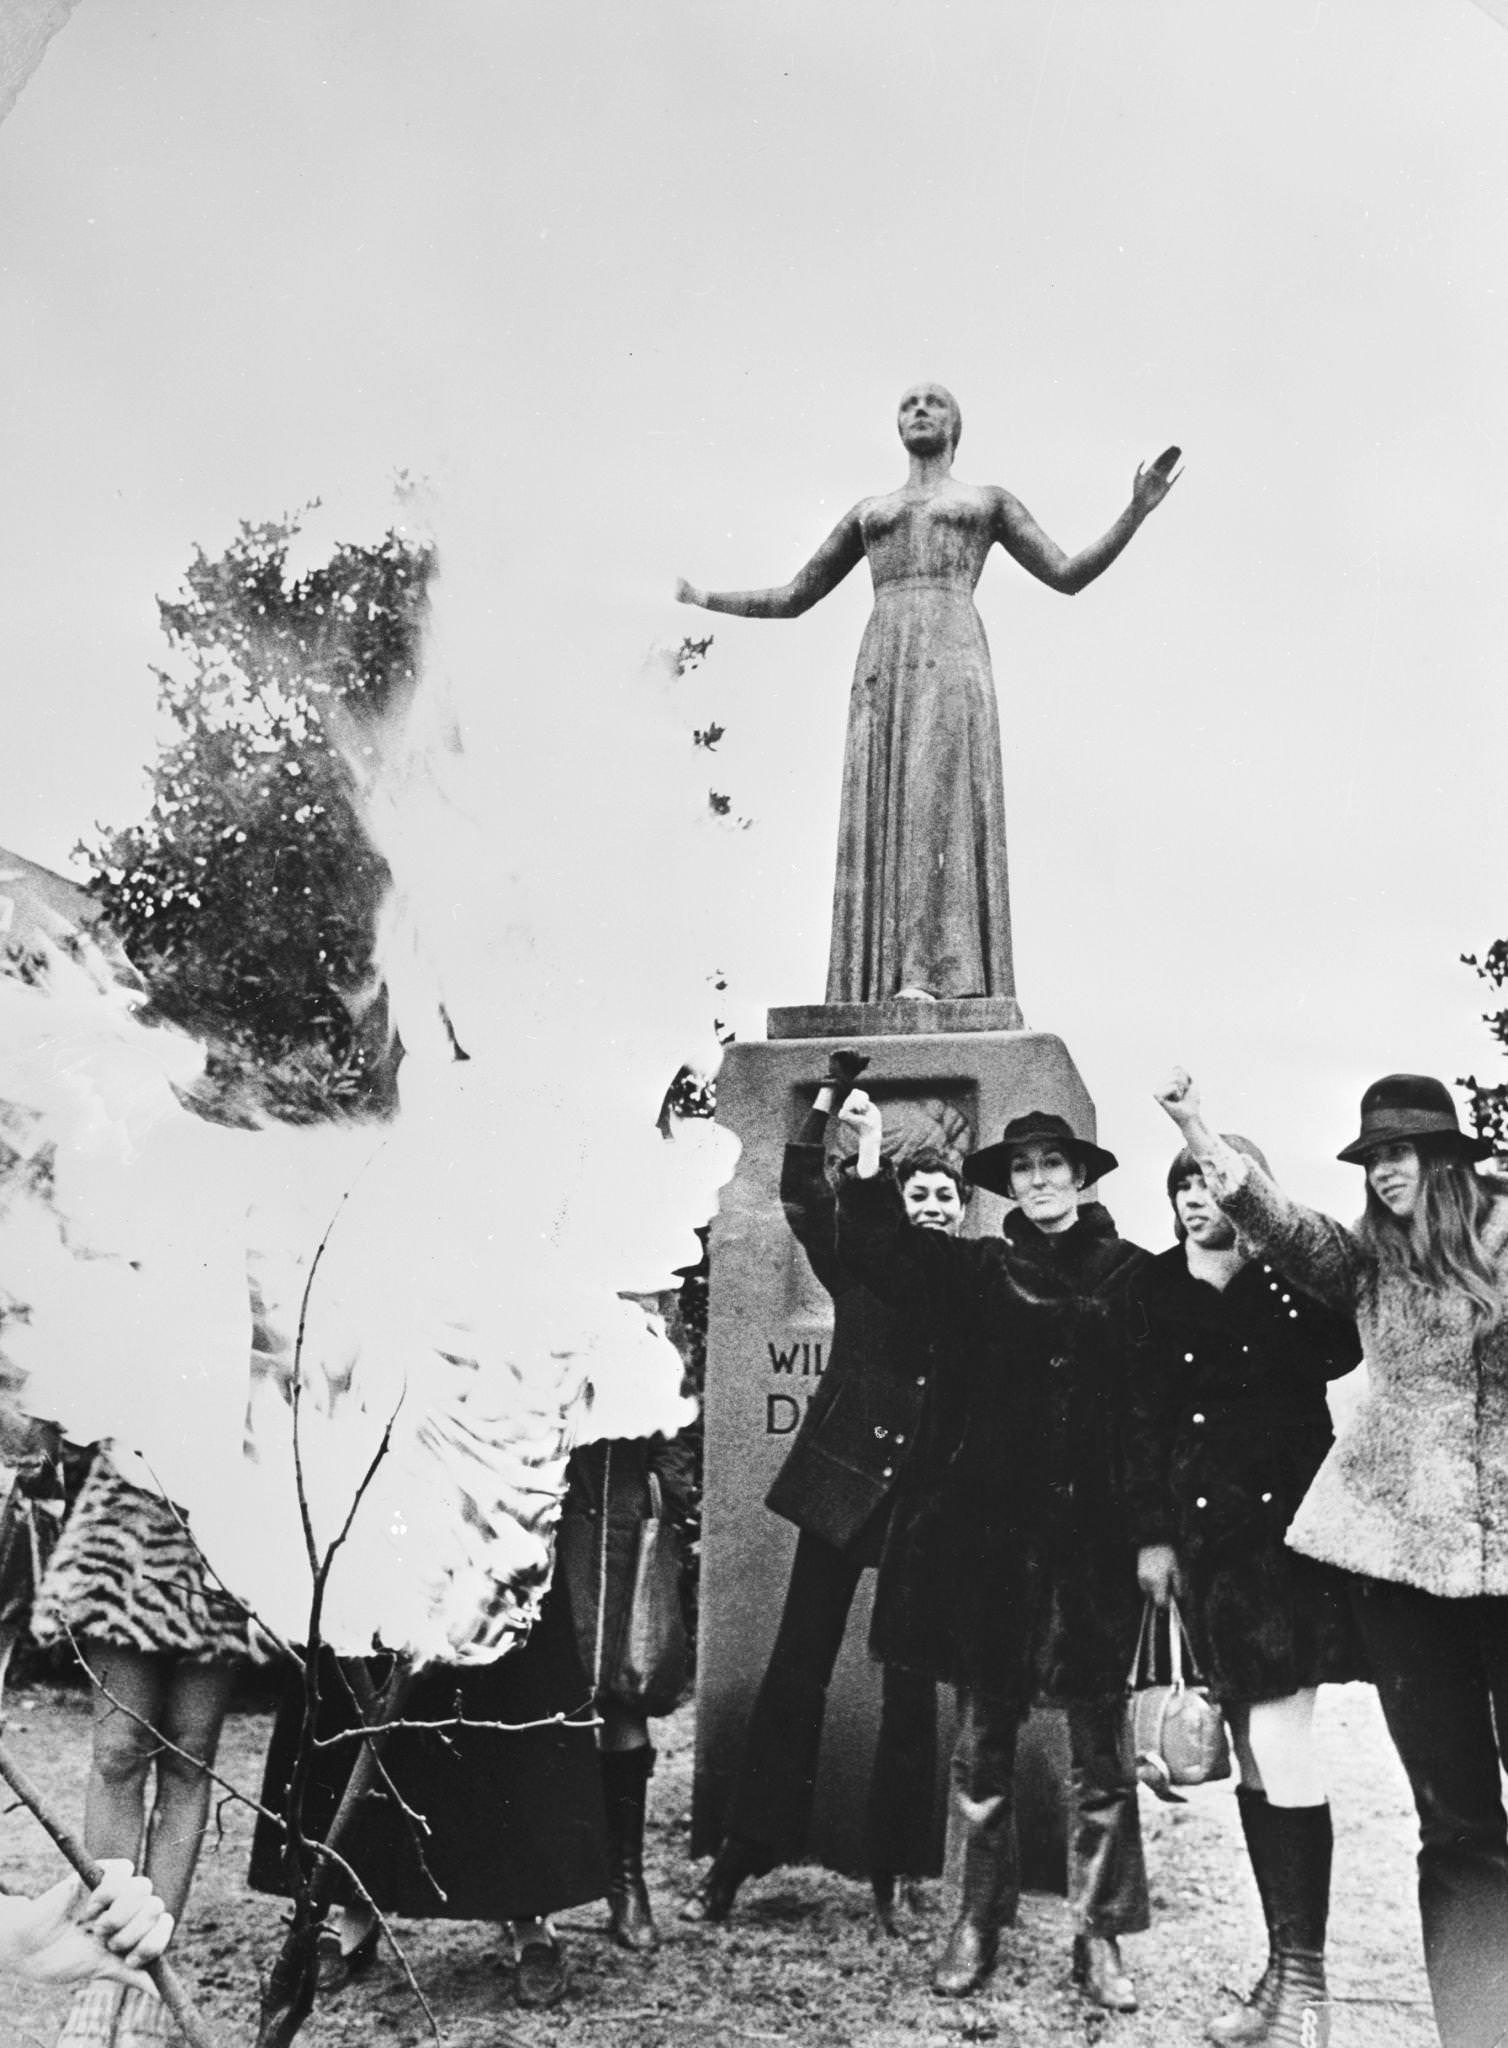 Members of the Dutch branch of the Women's Liberation Movement, the Dolle Mina, burn corsets beneath the statue of Dutch feminist Wilhelmina Drucker (Mad Mina) in Amsterdam, 1970s